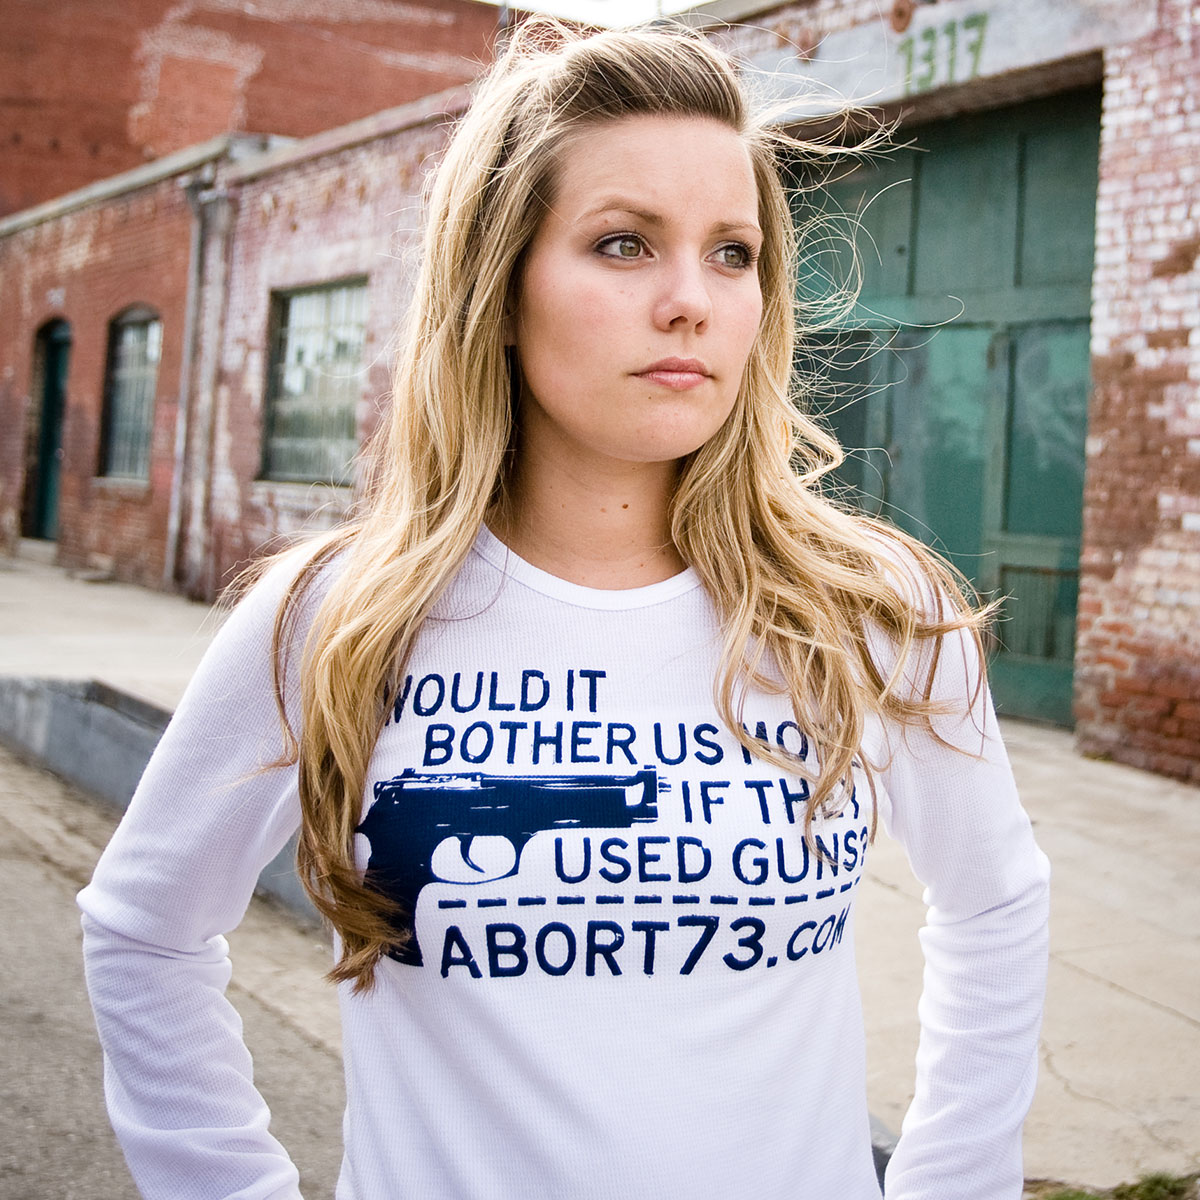 Would it Bother Us More if They Used Guns? (Abort73 Unisex Thermal)